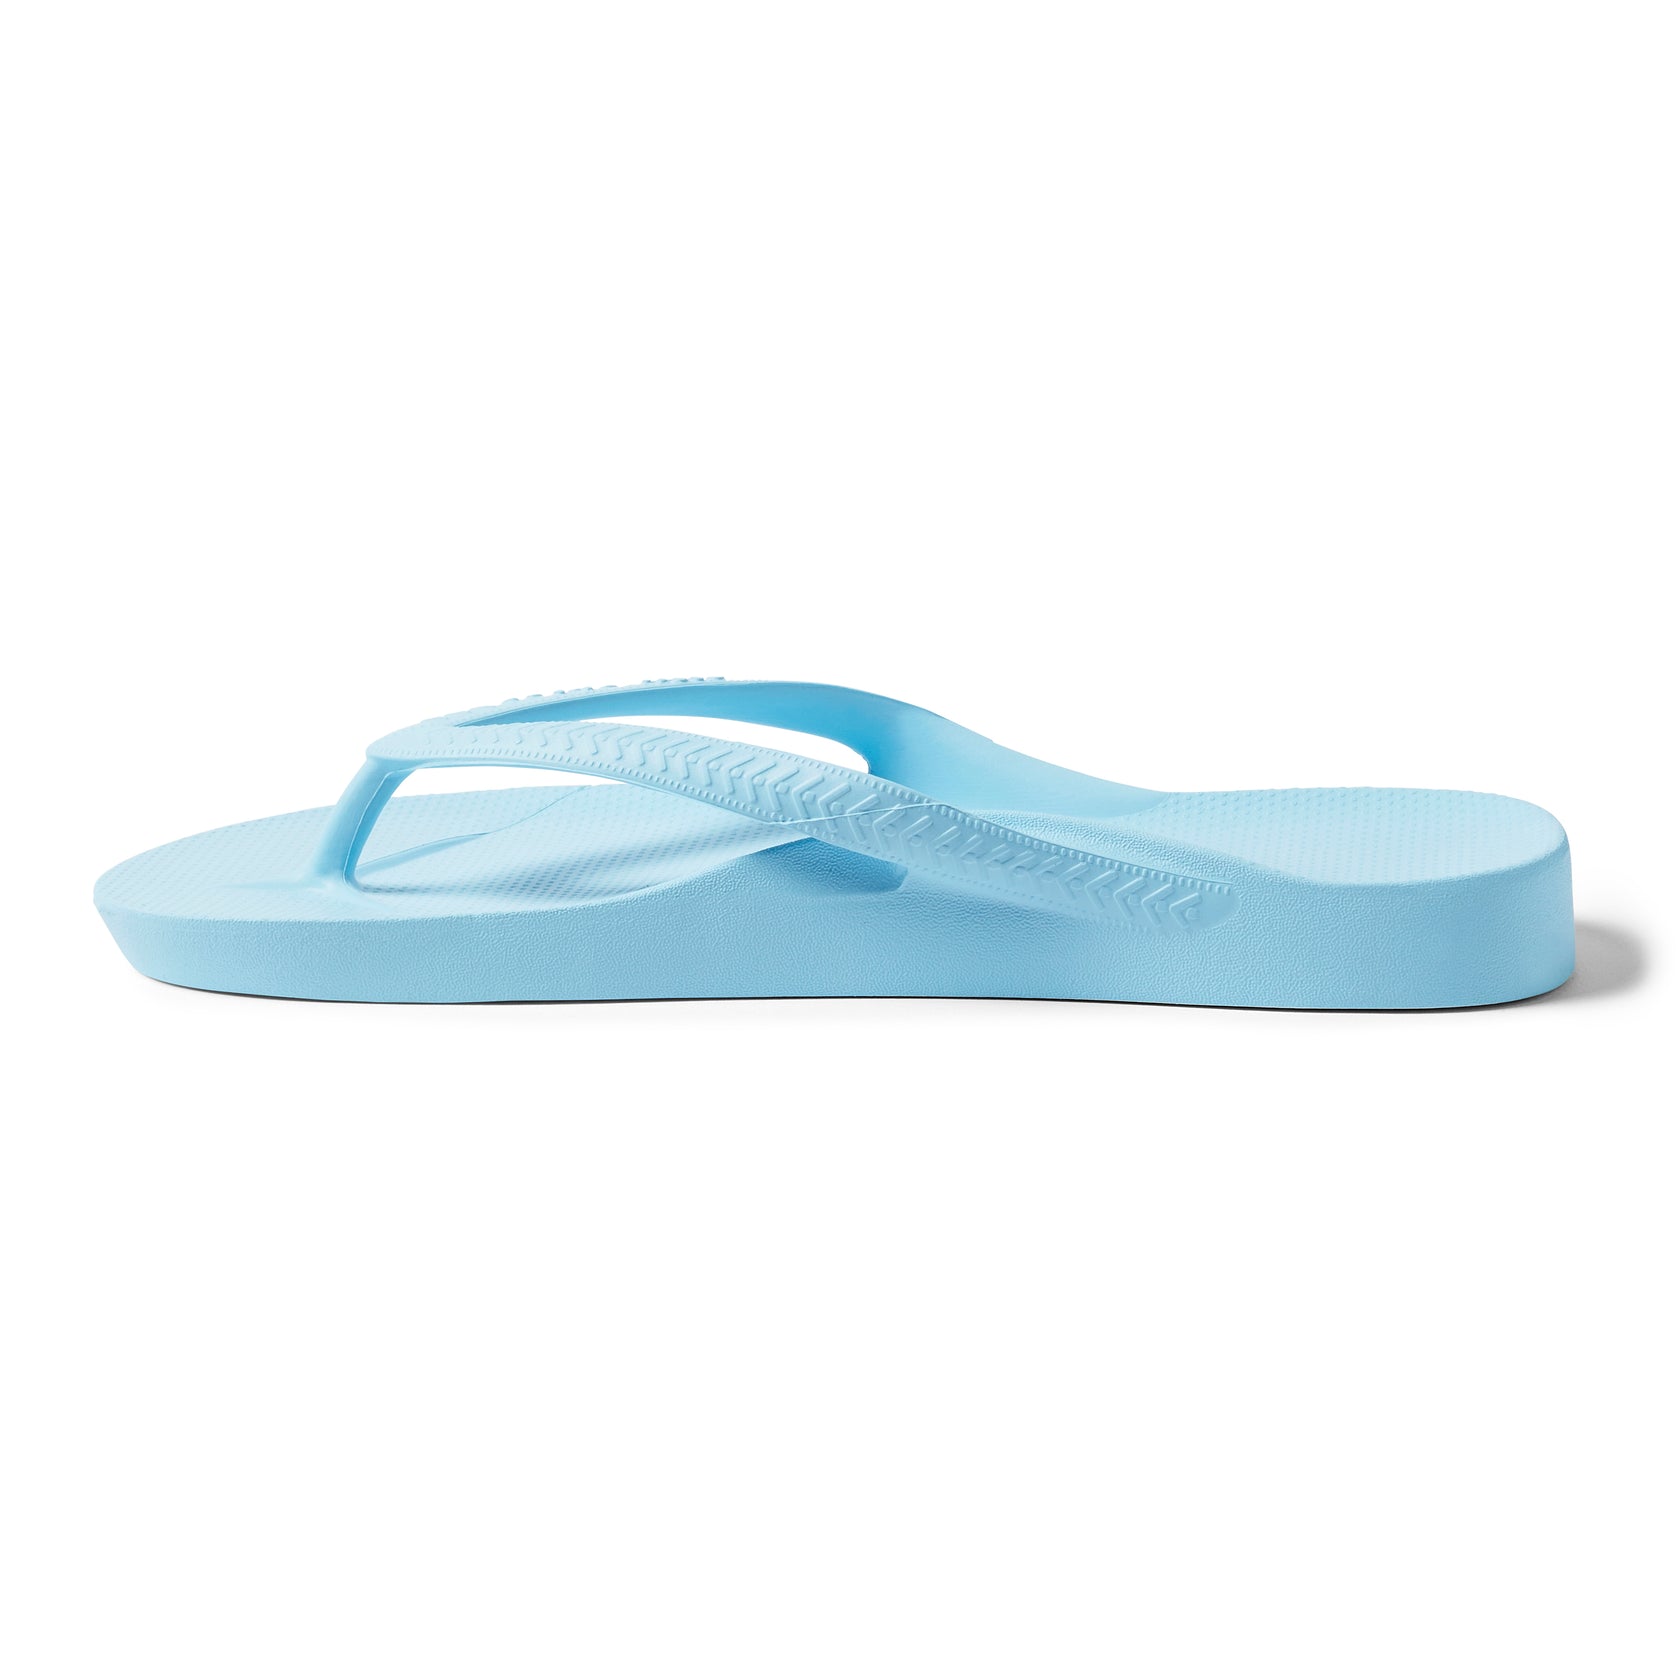 Archies Arch Support Flip Flops | Fusion Rehab and Wellness